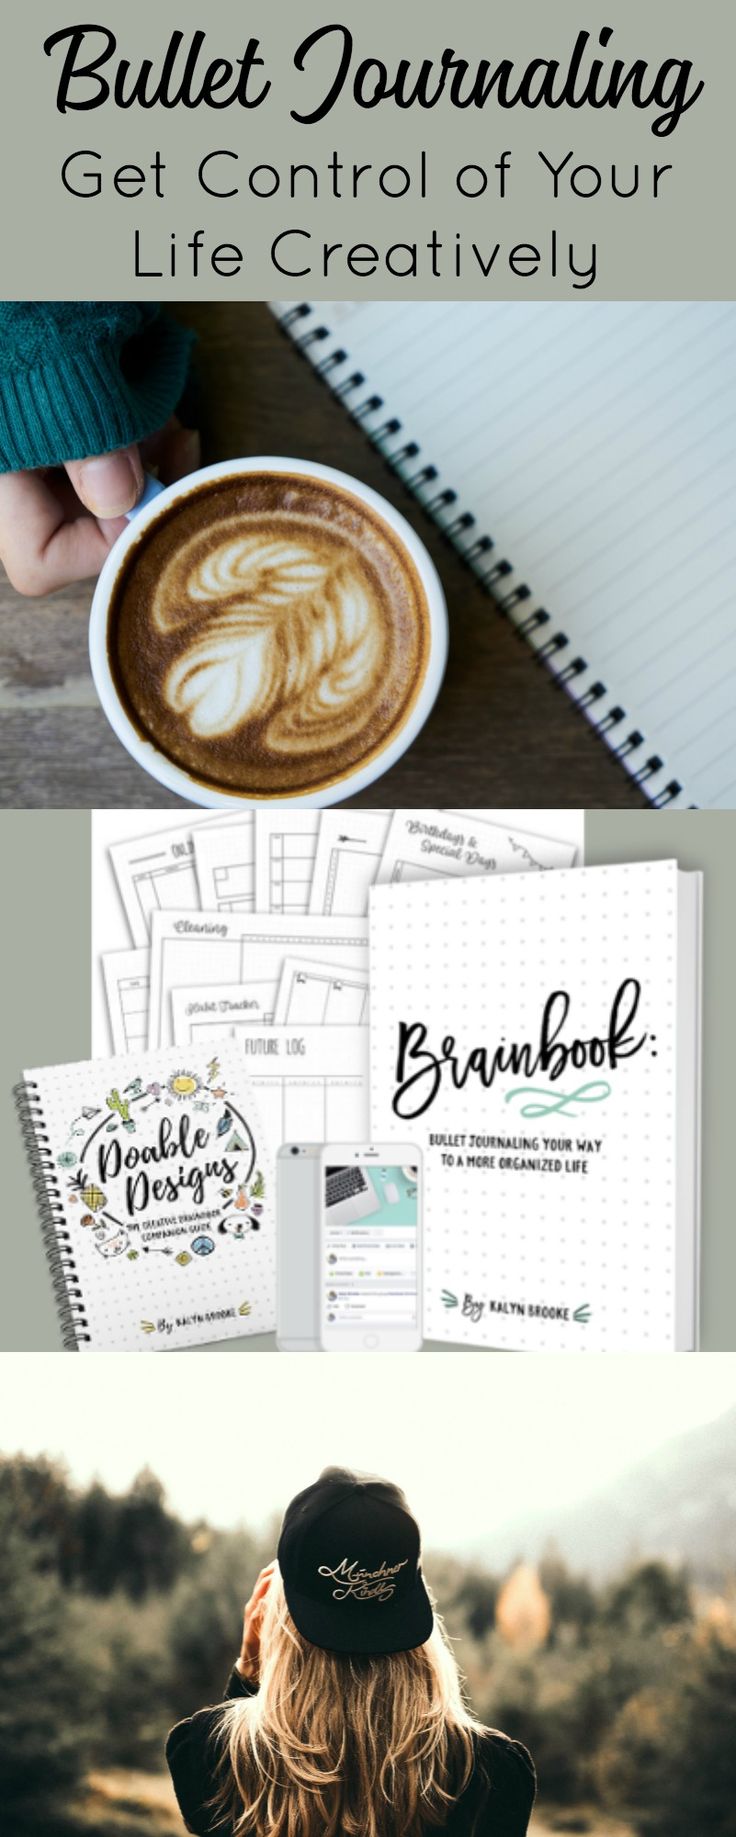 Bullet Journaling is all the trend right now and would be a great gift for the c...